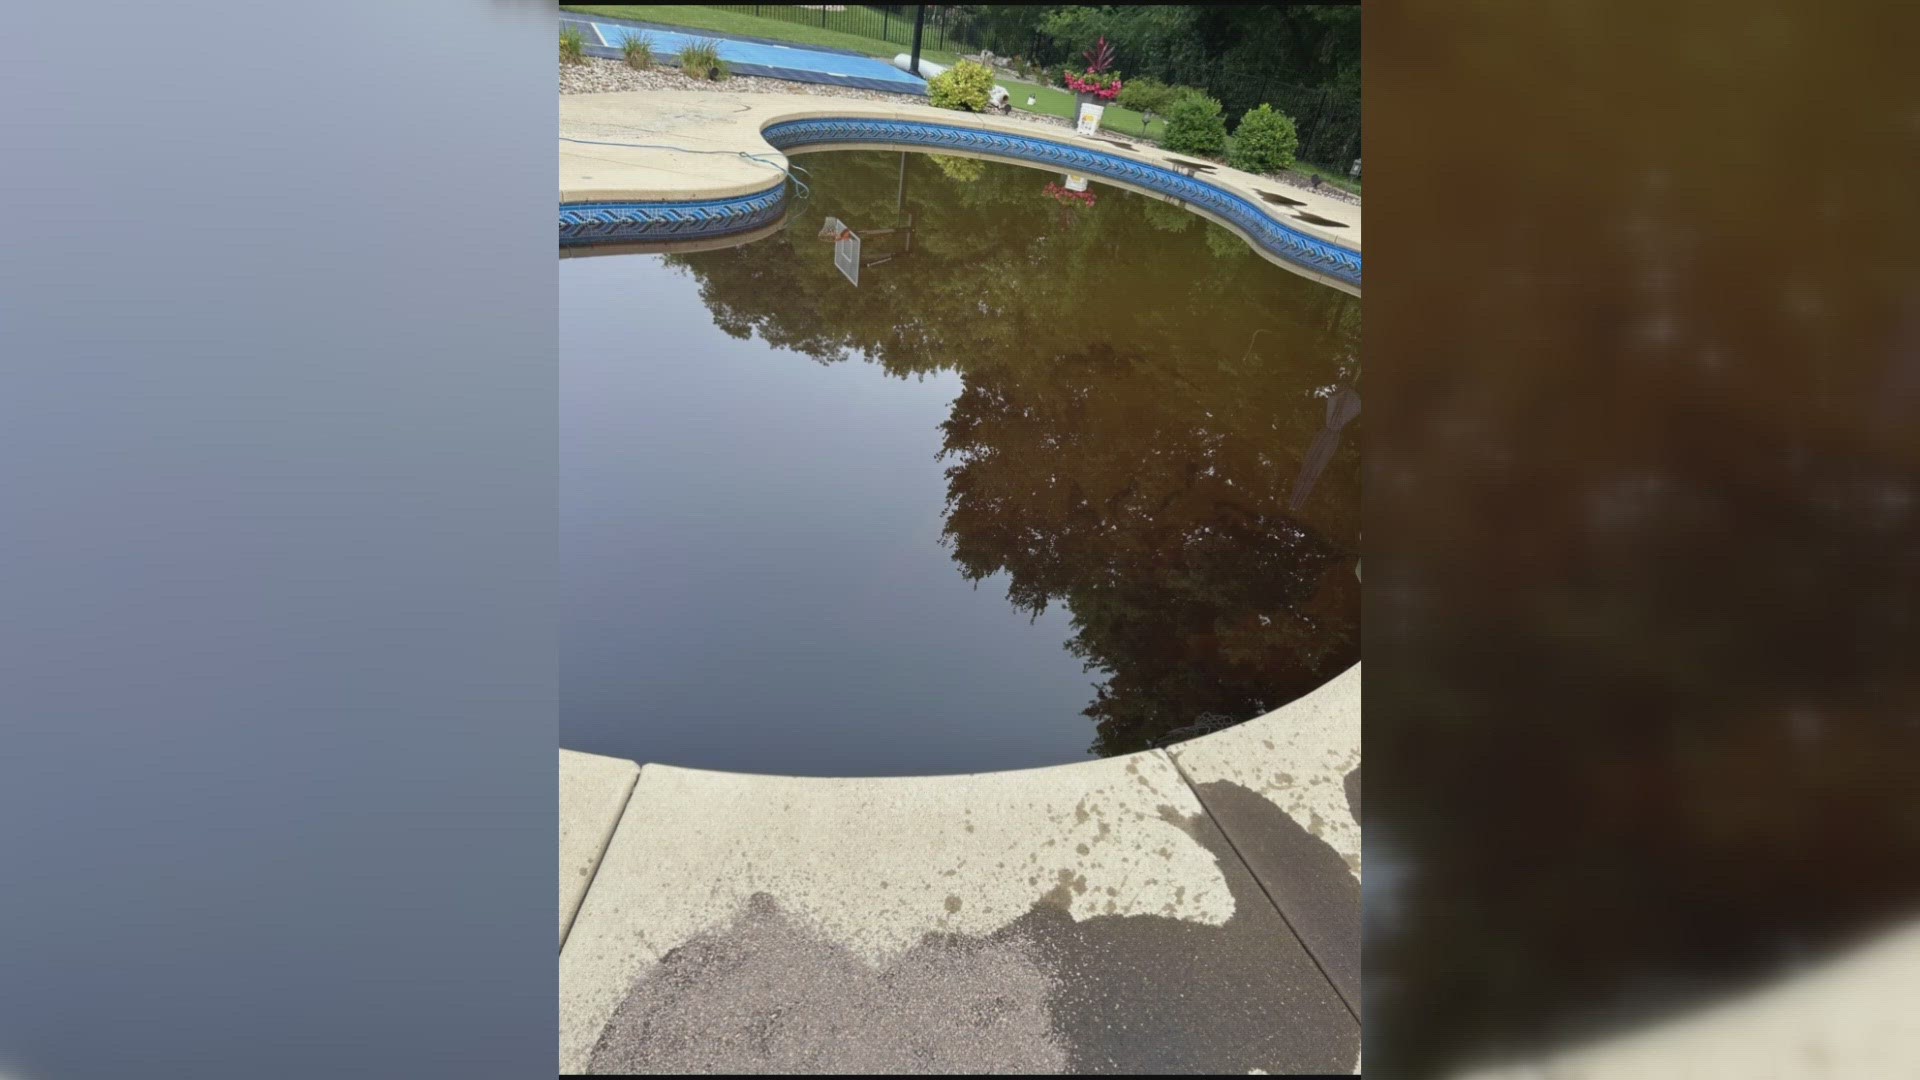 O'Fallon police are searching for the suspects behind this pool vandalization and more. The suspects also damaged home property.